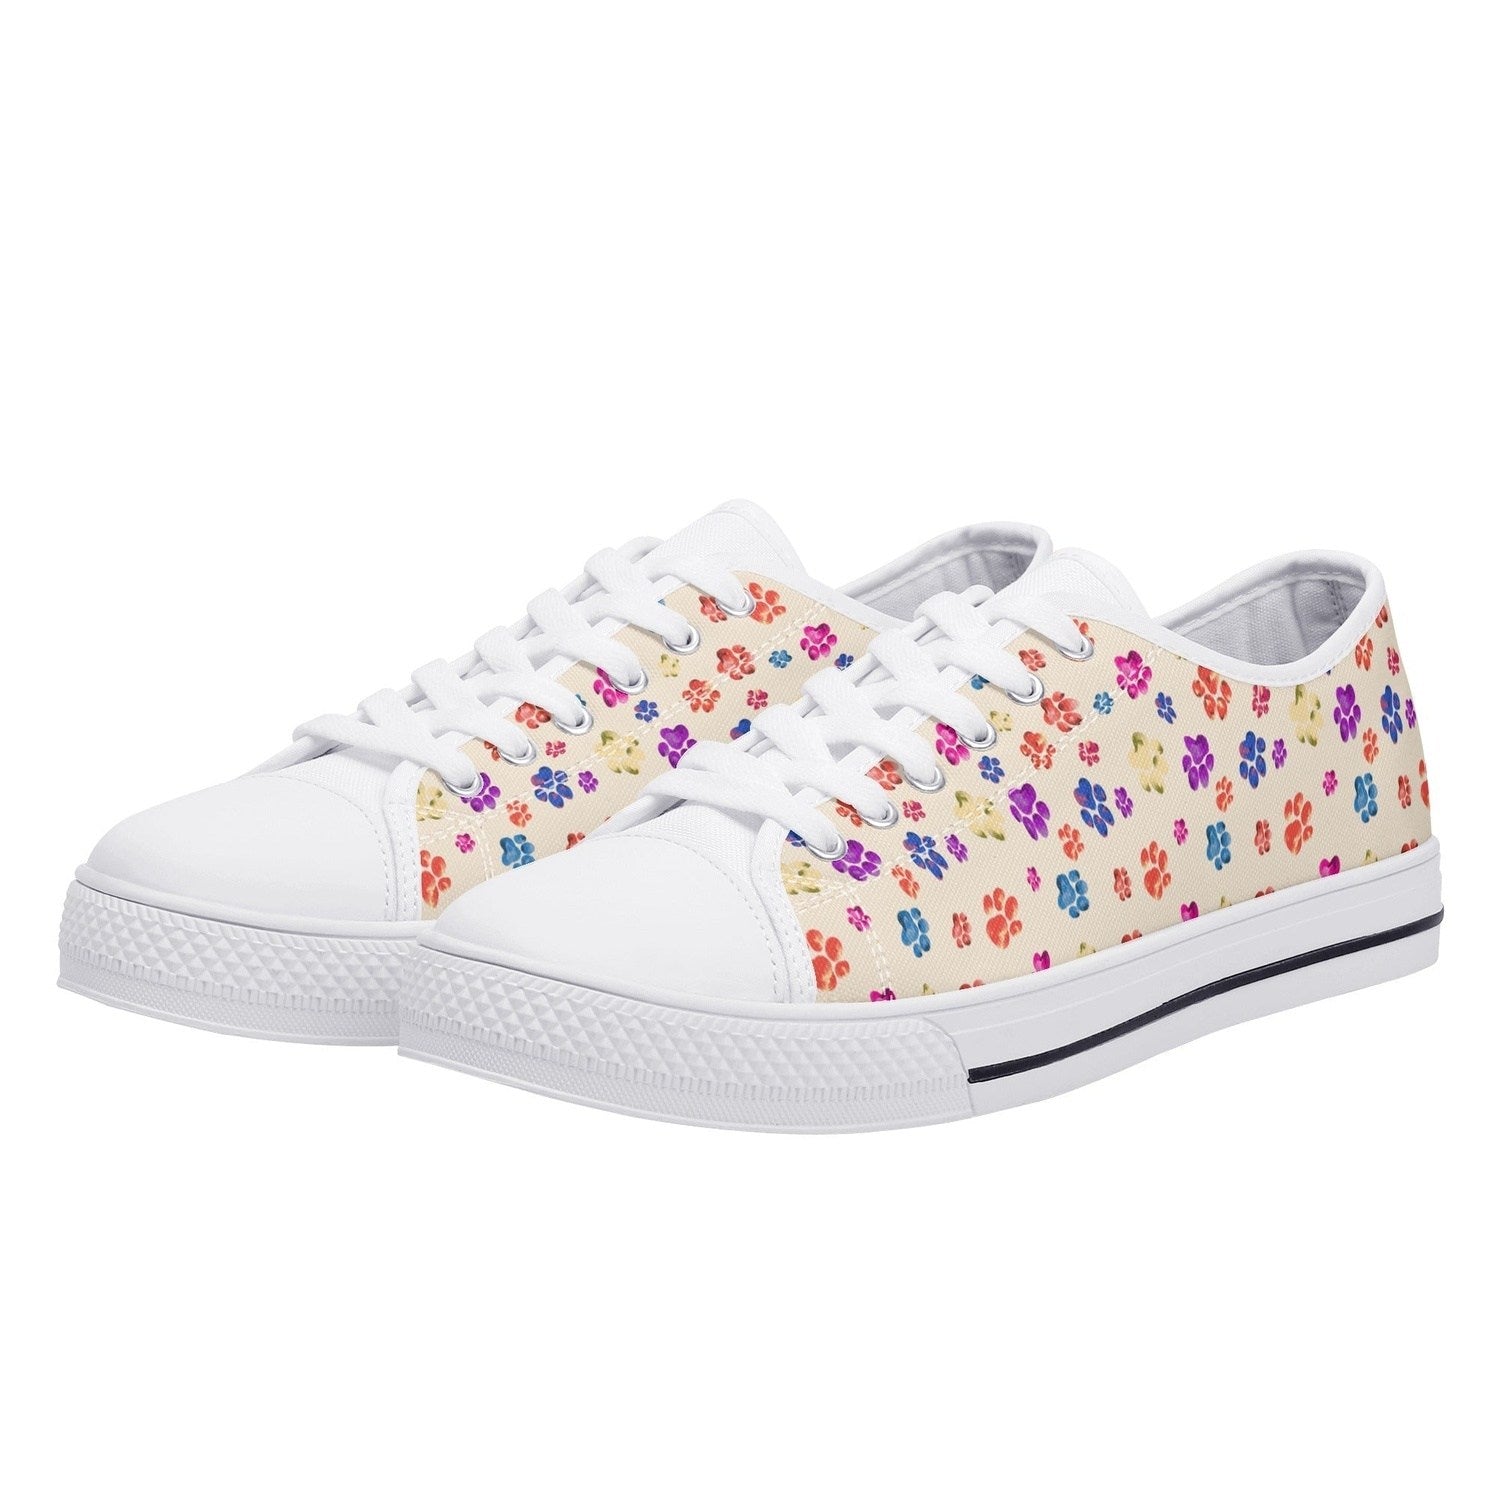 Painted Paws 2 Women's Low Top Canvas Shoes